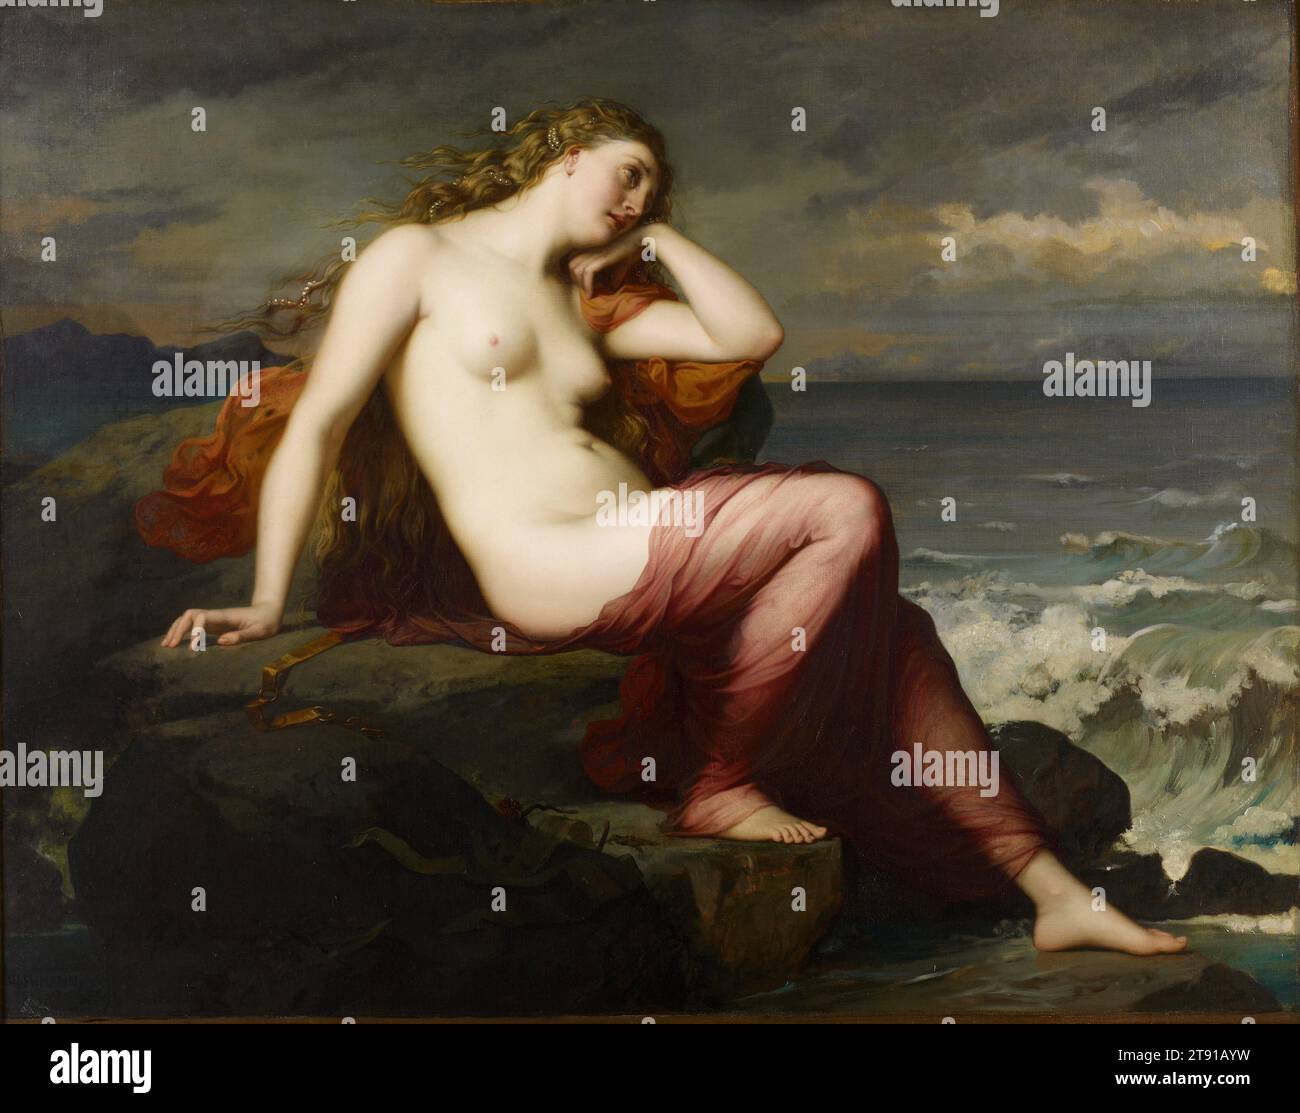 Calypso, 1869, Henri Lehmann, French, 1814 - 1882, 47 1/2 x 60 1/4 in. (120.7 x 153.0 cm), Oil on canvas, France, 19th century, The story of the beautiful nymph Calypso is told in Homer's 'Odyssey', an ancient Greek epic. Calypso lived on the island of Ogygia, where the shipwrecked hero Ulysses (Odysseus) drifted ashore. Plying Ulysses with luxuries, love, and offers of immortality, Calypso kept him with her for seven years. Finally the gods intervened and let him sail for home. Here, Calypso mourns Ulysses' departure, on the same shore where the homesick hero himself used to stare Stock Photo